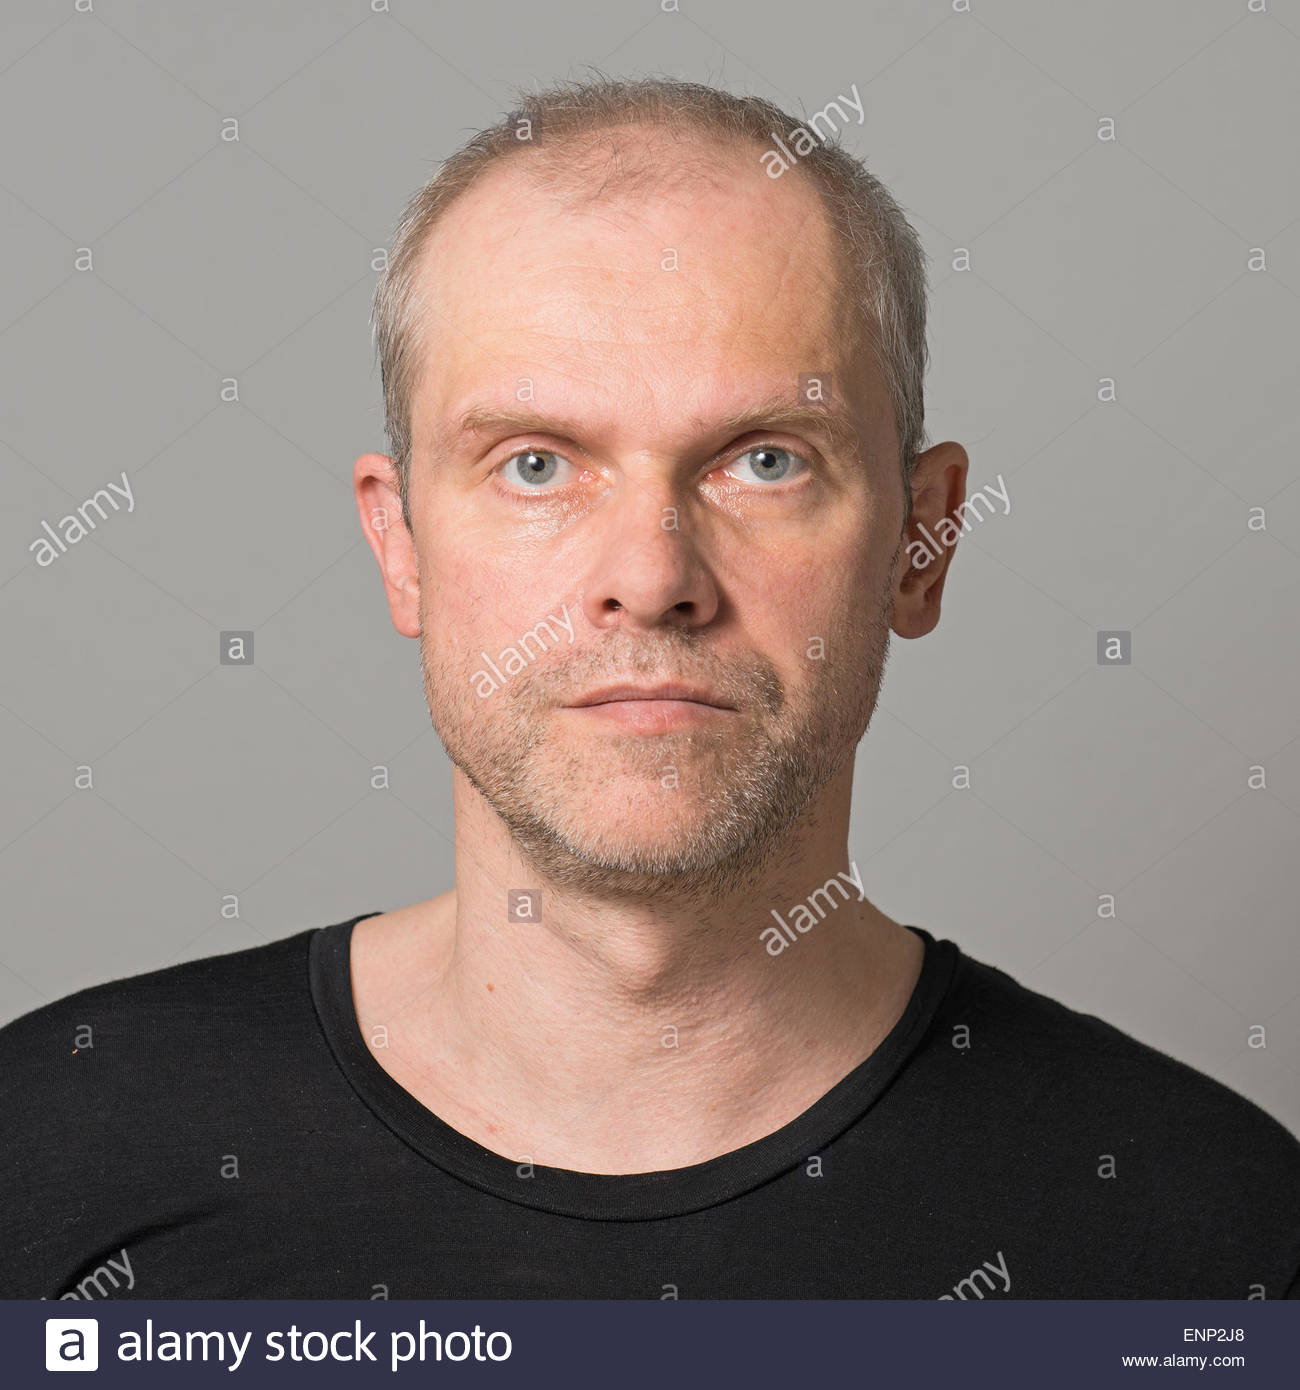 Passport Photo Stock Photos & Passport Photo Stock Images - Alamy